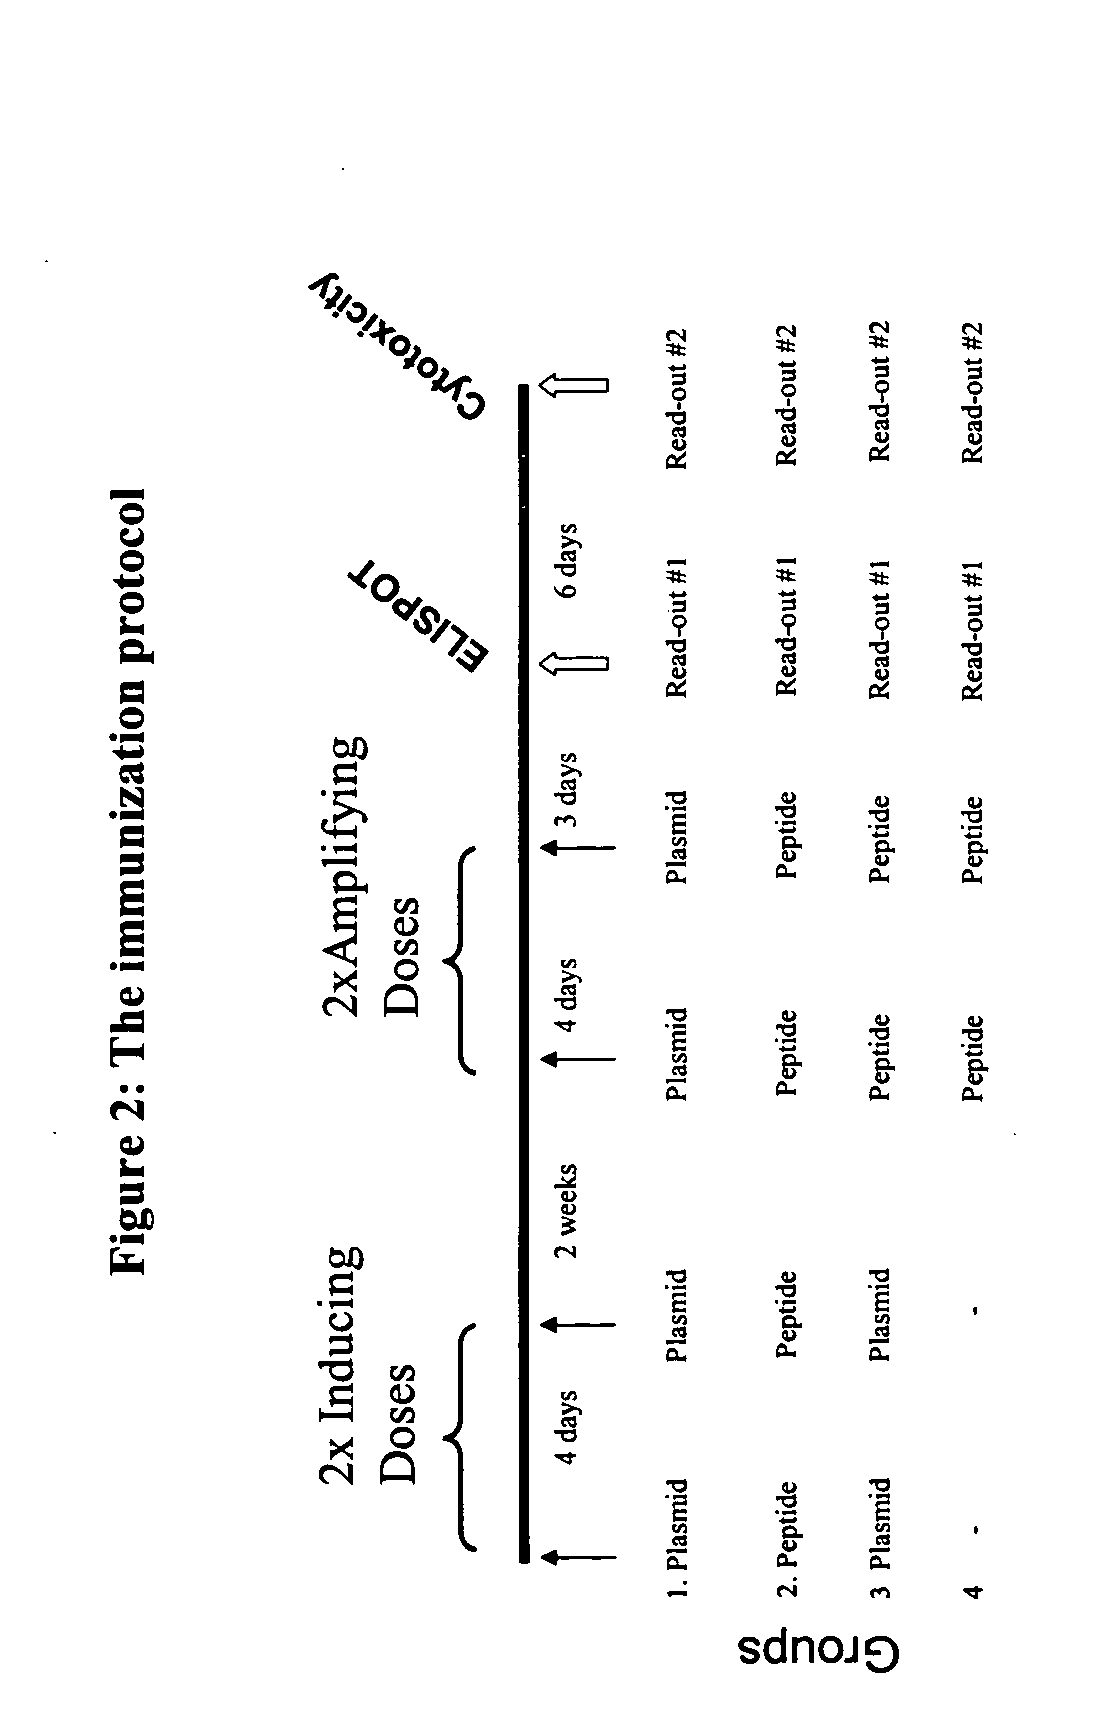 Methods of elicit, enhance and sustain immune responses against MHC class I-restricted epitopes, for prophylactic or therapeutic purposes